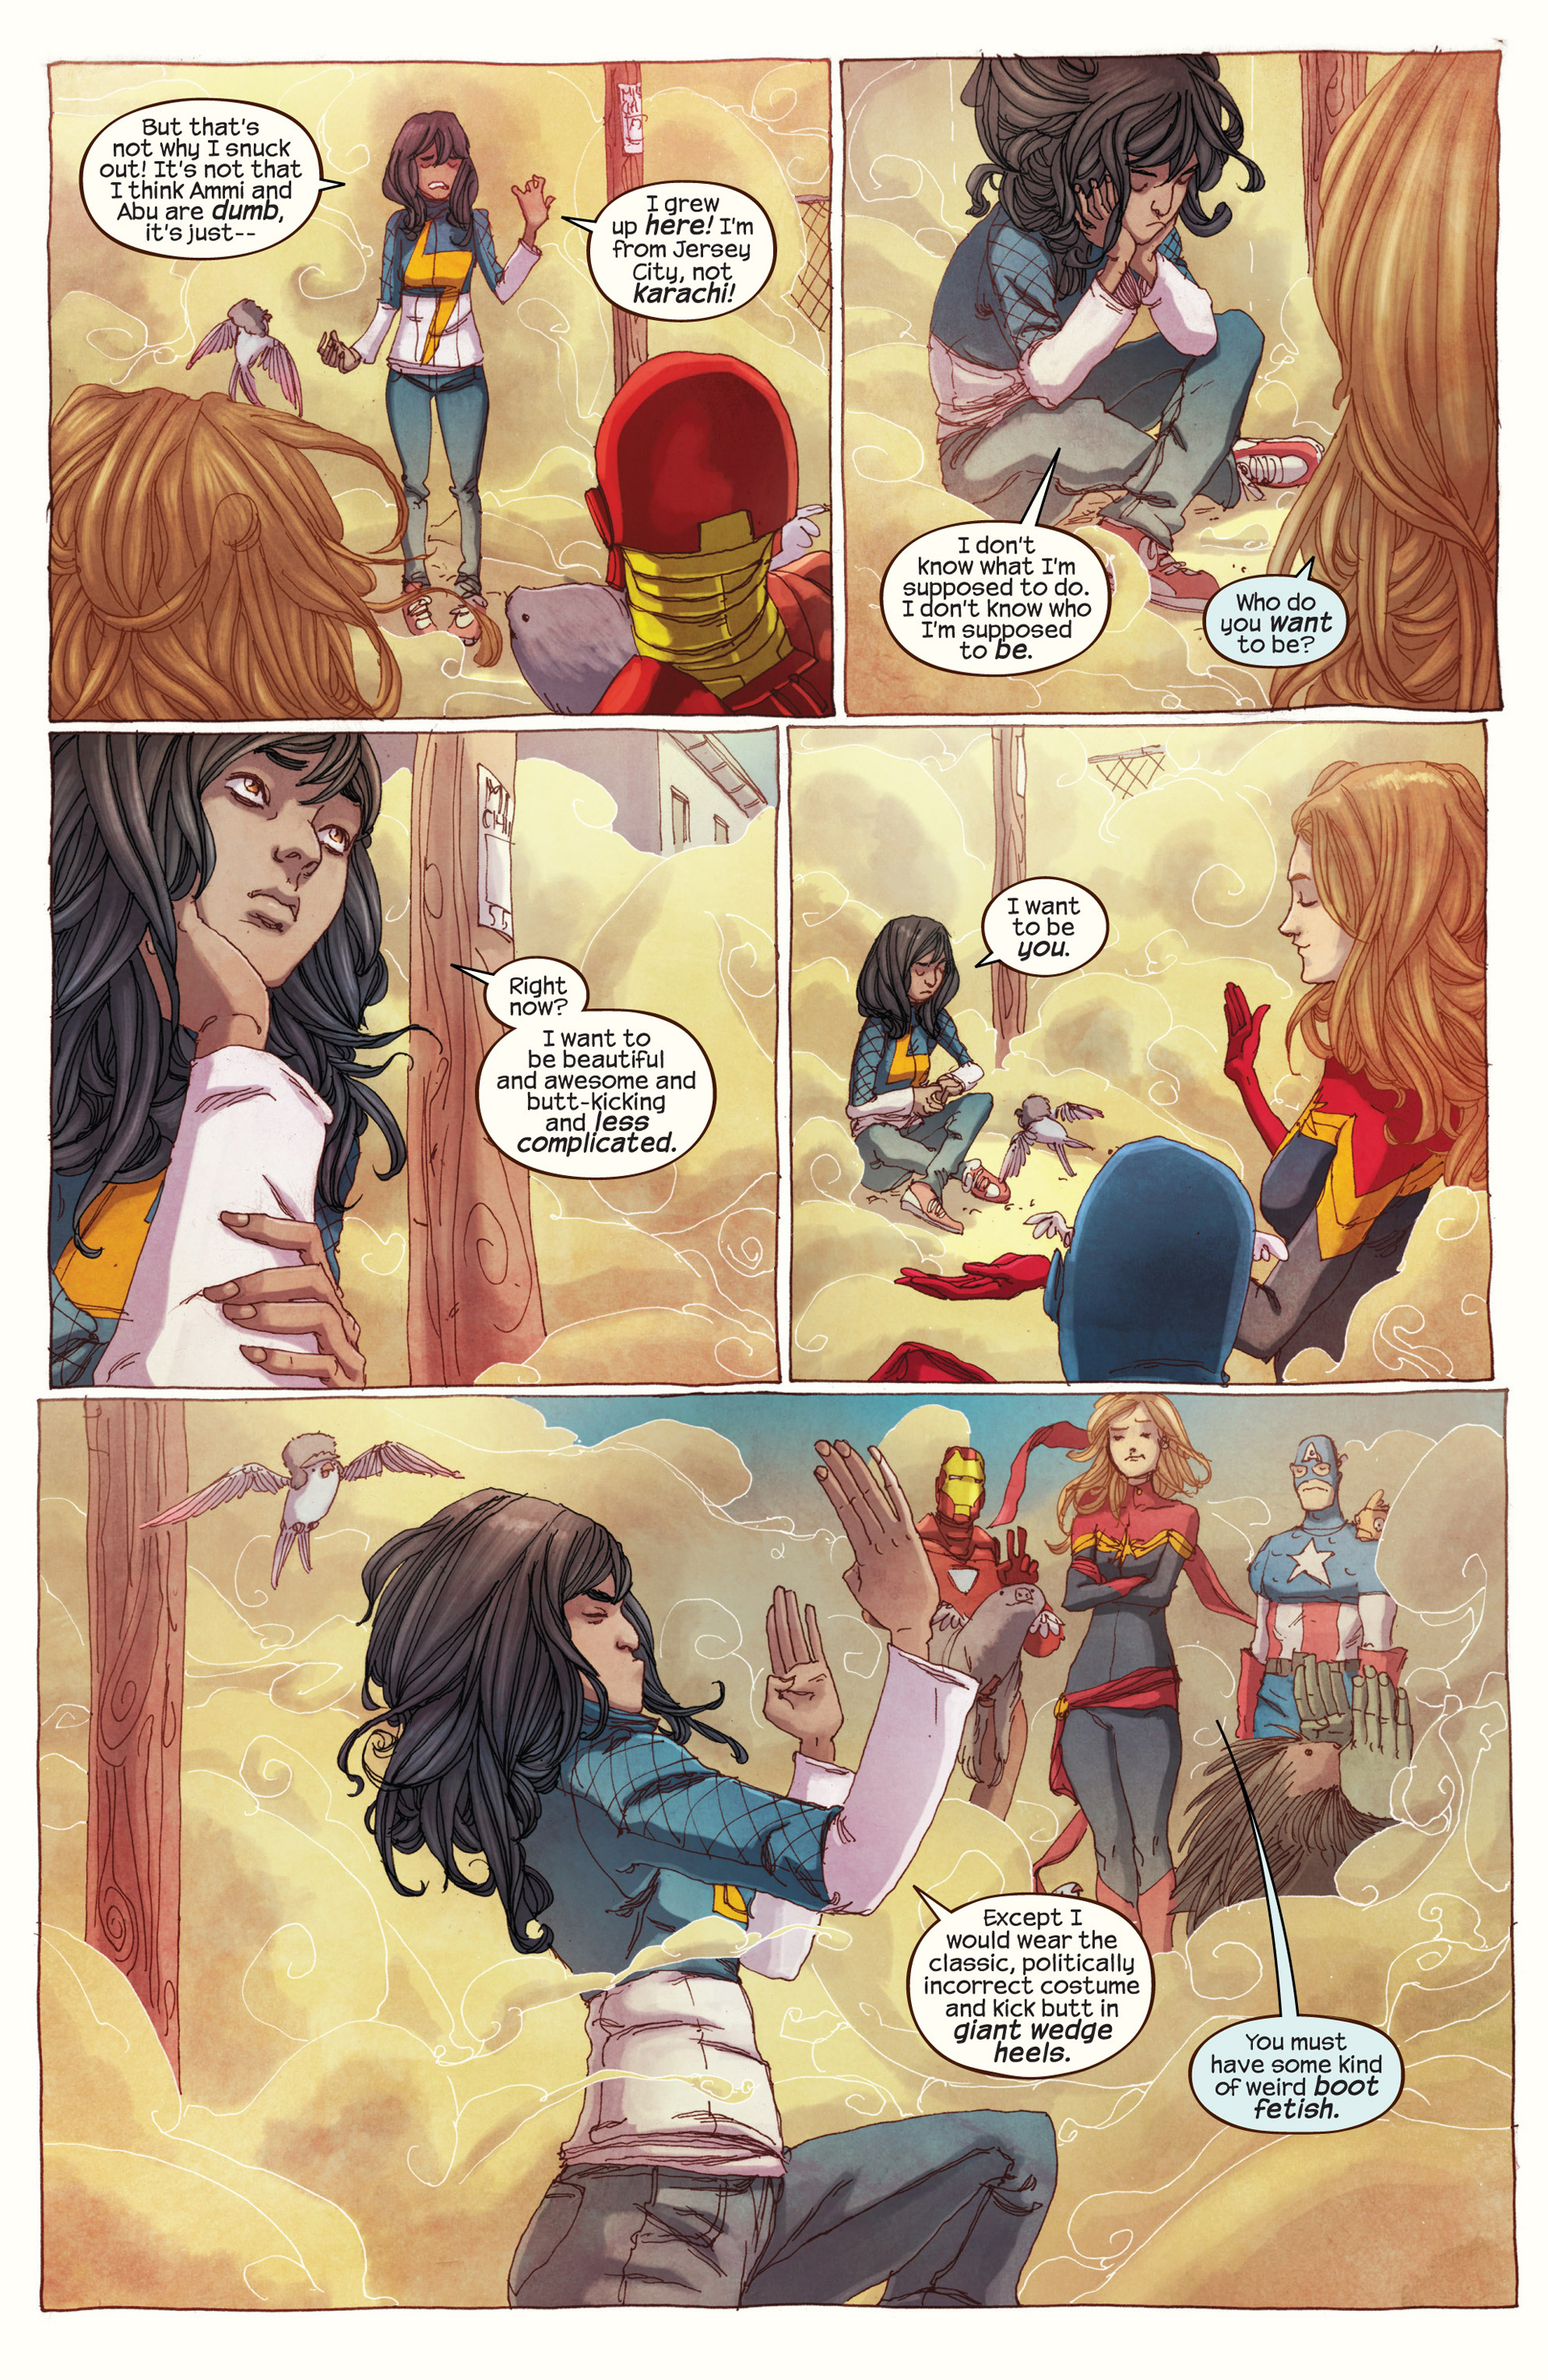 Ms Marvel 2014 1 Read Ms Marvel 2014 Issue 1 Page 18 